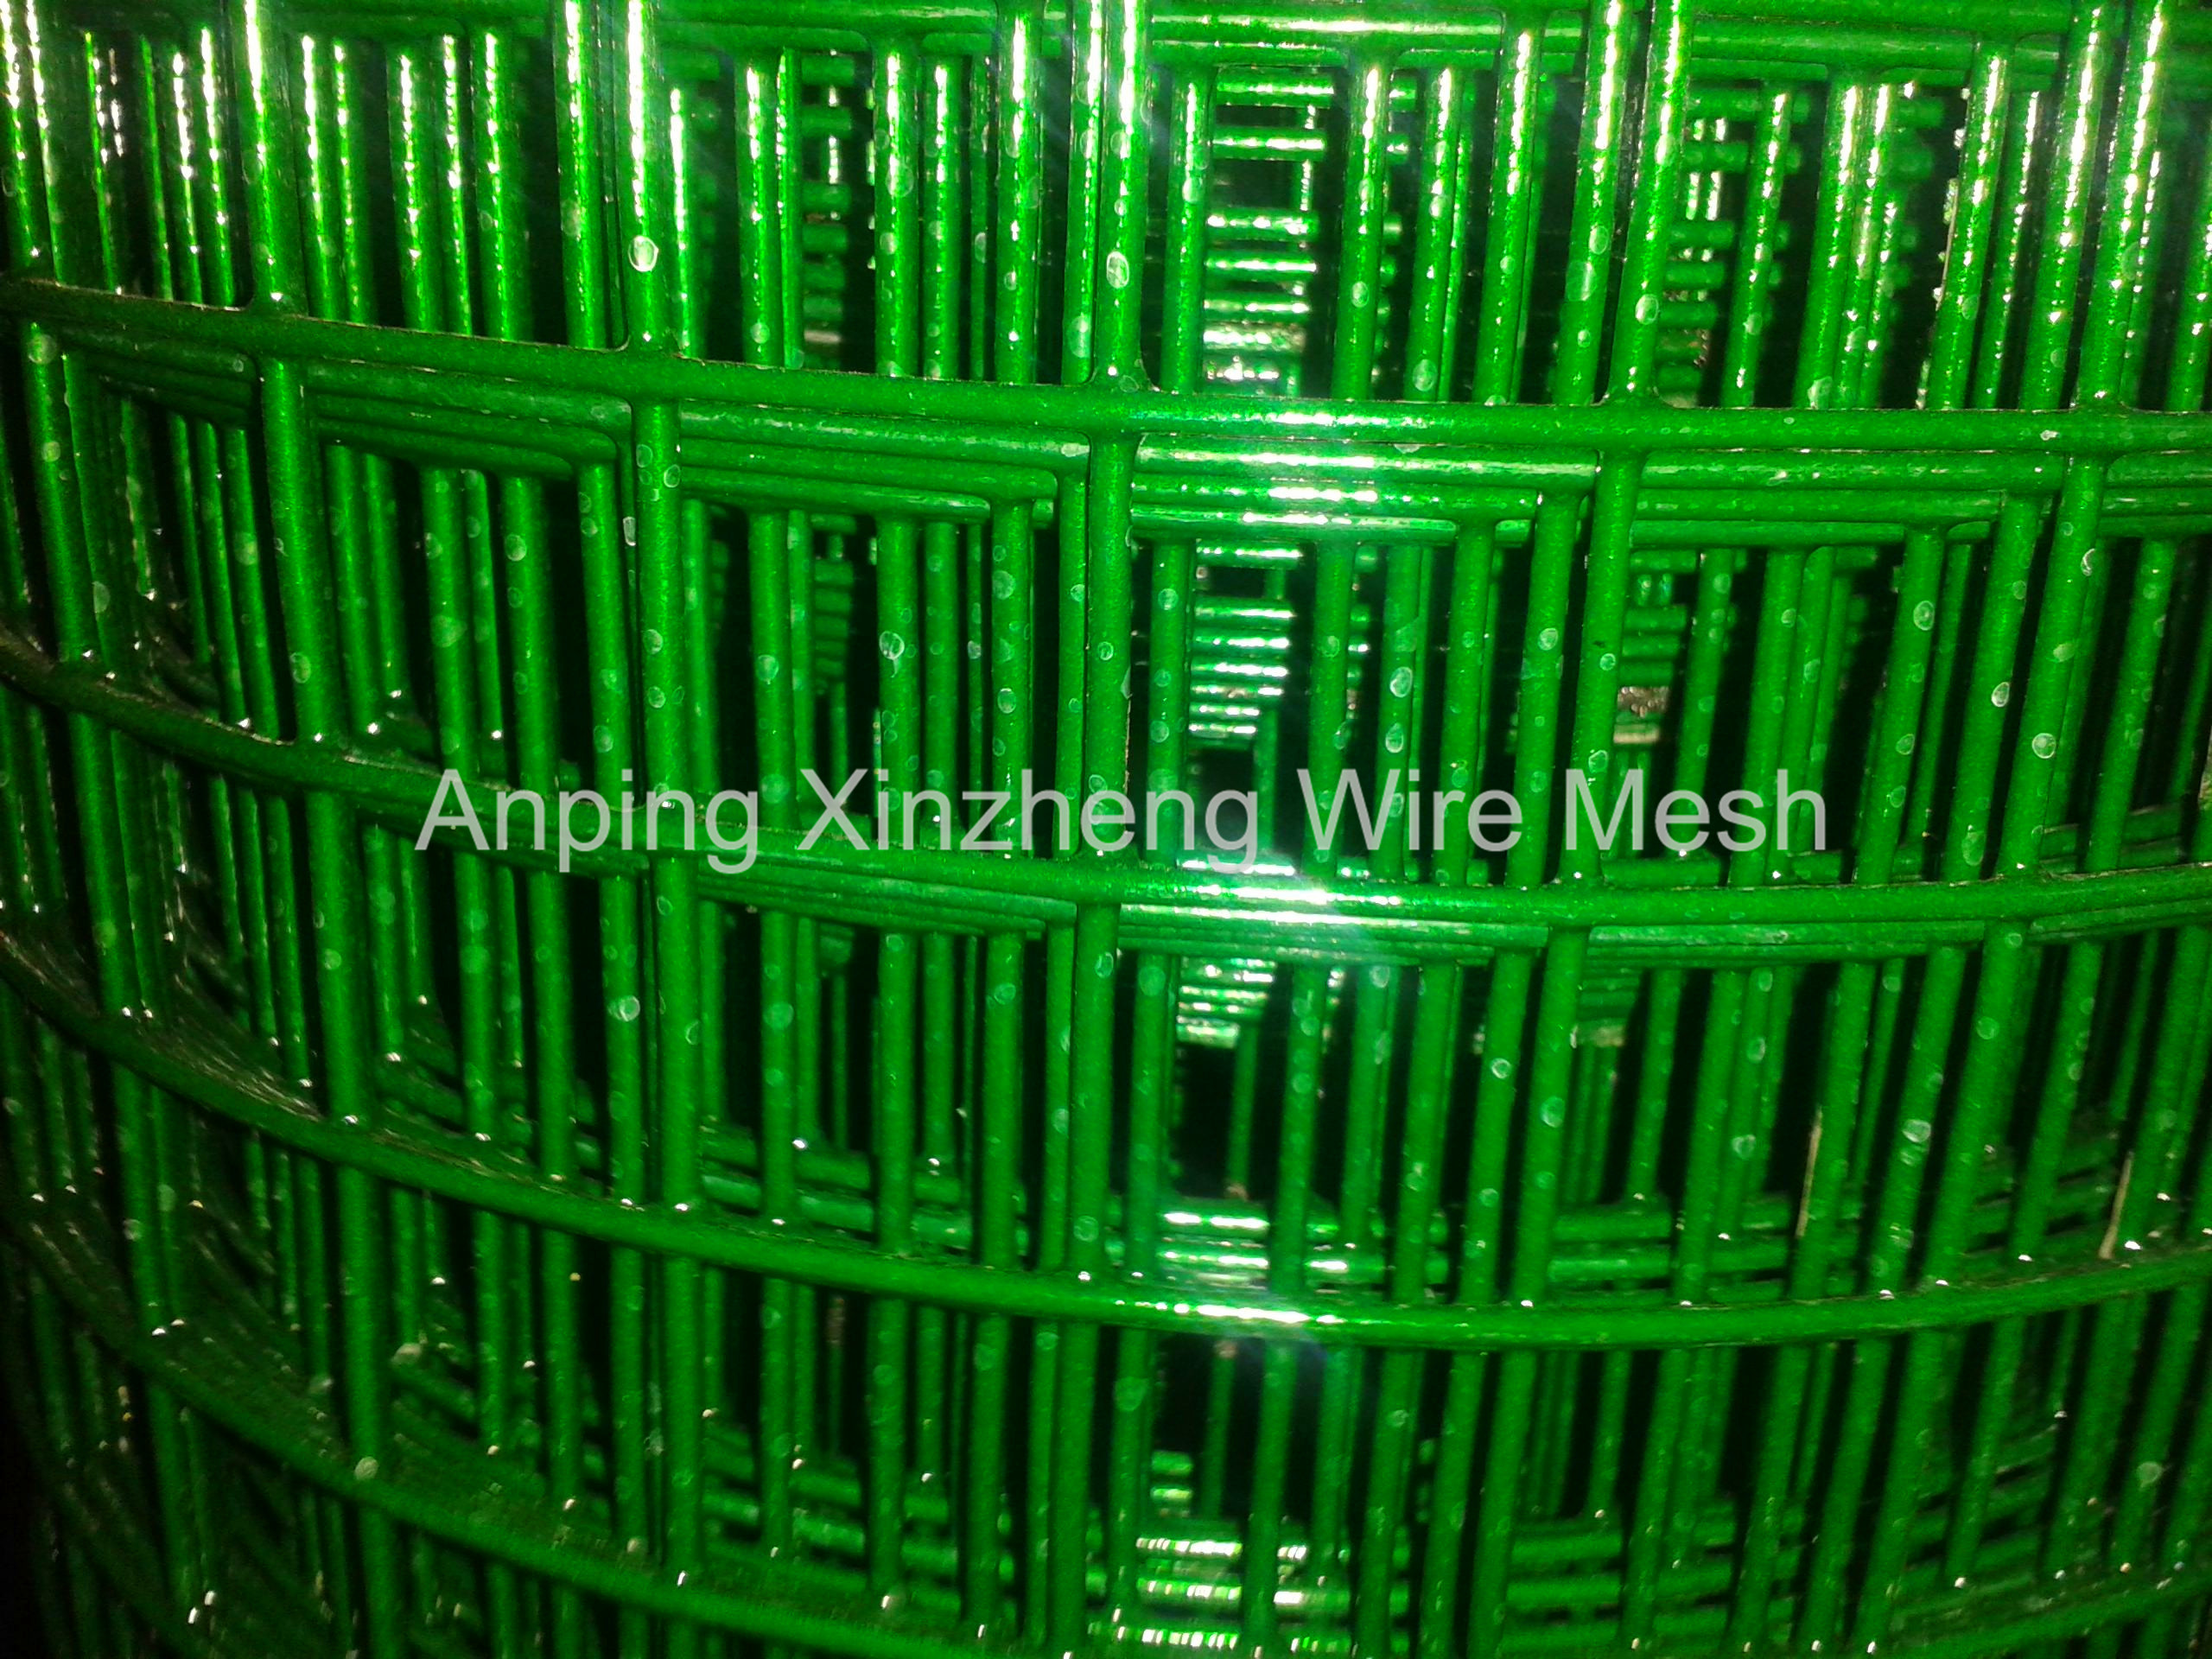 PVC Coated Welded Wire Mesh